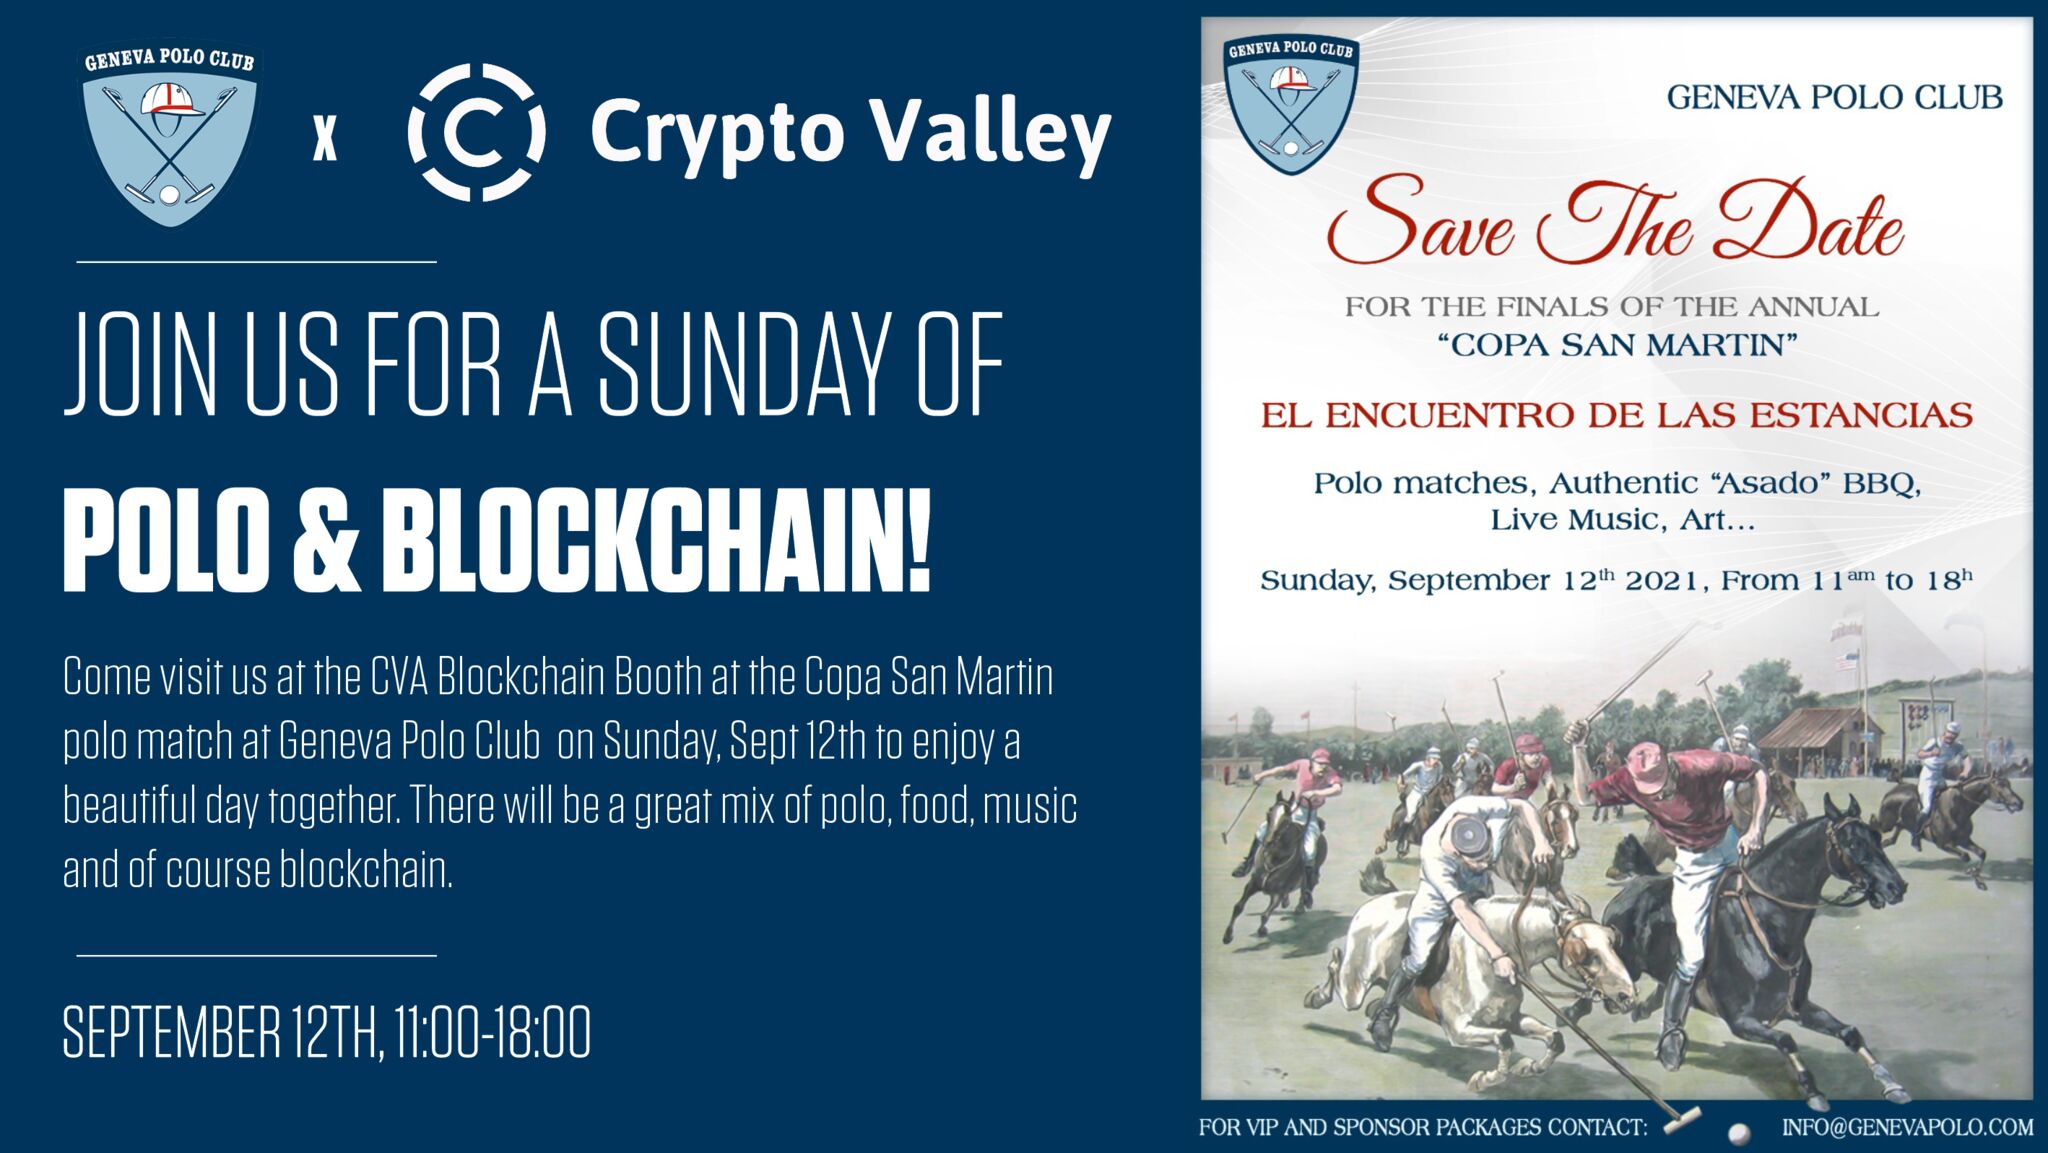 What are your plans for Sunday, September 12th?! We'll be at the GenevaPoloClub enjoying a day filled with polo matches, good food, music and great conversations about crypto & blockchain at CVA Blockchain Booth. Come and join us and let's enjoy a beautiful day outside together! Our team will be at the CVA Blockchain Booth where you can learn more about crypto & blockchain or just simply meet some amazing people :) Jérôme Bailly Sheraz Ahmed Christoph J Ebell Yann Gerardi